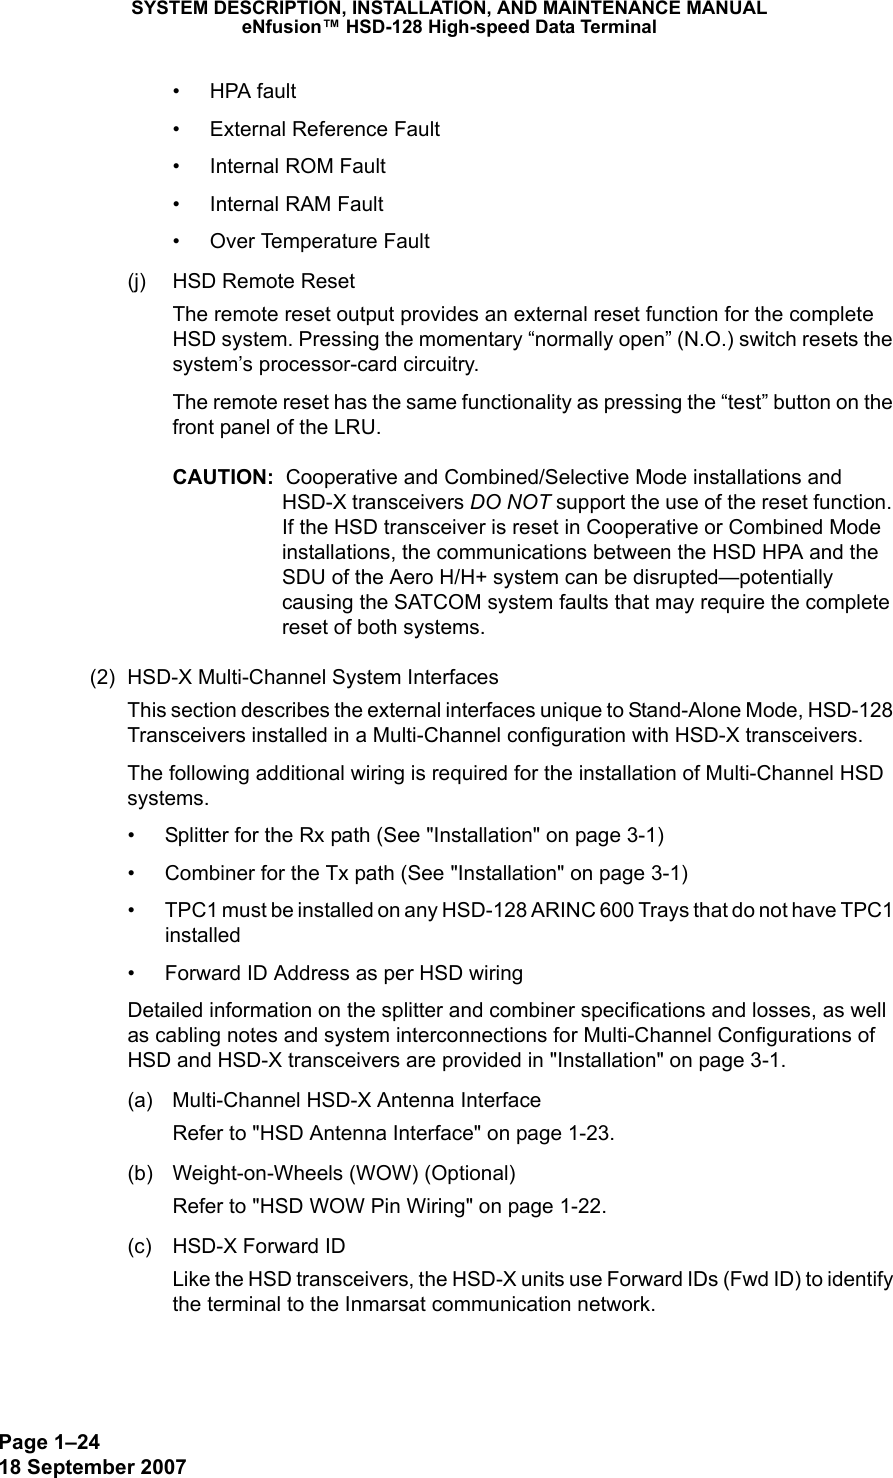 Page 1–2418 September 2007SYSTEM DESCRIPTION, INSTALLATION, AND MAINTENANCE MANUALeNfusion™ HSD-128 High-speed Data Terminal• HPA fault• External Reference Fault• Internal ROM Fault• Internal RAM Fault• Over Temperature Fault(j) HSD Remote ResetThe remote reset output provides an external reset function for the complete HSD system. Pressing the momentary “normally open” (N.O.) switch resets the system’s processor-card circuitry.The remote reset has the same functionality as pressing the “test” button on the front panel of the LRU.CAUTION:  Cooperative and Combined/Selective Mode installations and HSD-X transceivers DO NOT support the use of the reset function. If the HSD transceiver is reset in Cooperative or Combined Mode installations, the communications between the HSD HPA and the SDU of the Aero H/H+ system can be disrupted—potentially causing the SATCOM system faults that may require the complete reset of both systems.(2) HSD-X Multi-Channel System InterfacesThis section describes the external interfaces unique to Stand-Alone Mode, HSD-128 Transceivers installed in a Multi-Channel configuration with HSD-X transceivers. The following additional wiring is required for the installation of Multi-Channel HSD systems.• Splitter for the Rx path (See &quot;Installation&quot; on page 3-1)• Combiner for the Tx path (See &quot;Installation&quot; on page 3-1)• TPC1 must be installed on any HSD-128 ARINC 600 Trays that do not have TPC1 installed • Forward ID Address as per HSD wiring Detailed information on the splitter and combiner specifications and losses, as well as cabling notes and system interconnections for Multi-Channel Configurations of HSD and HSD-X transceivers are provided in &quot;Installation&quot; on page 3-1. (a) Multi-Channel HSD-X Antenna InterfaceRefer to &quot;HSD Antenna Interface&quot; on page 1-23.(b) Weight-on-Wheels (WOW) (Optional)Refer to &quot;HSD WOW Pin Wiring&quot; on page 1-22. (c) HSD-X Forward IDLike the HSD transceivers, the HSD-X units use Forward IDs (Fwd ID) to identify the terminal to the Inmarsat communication network.